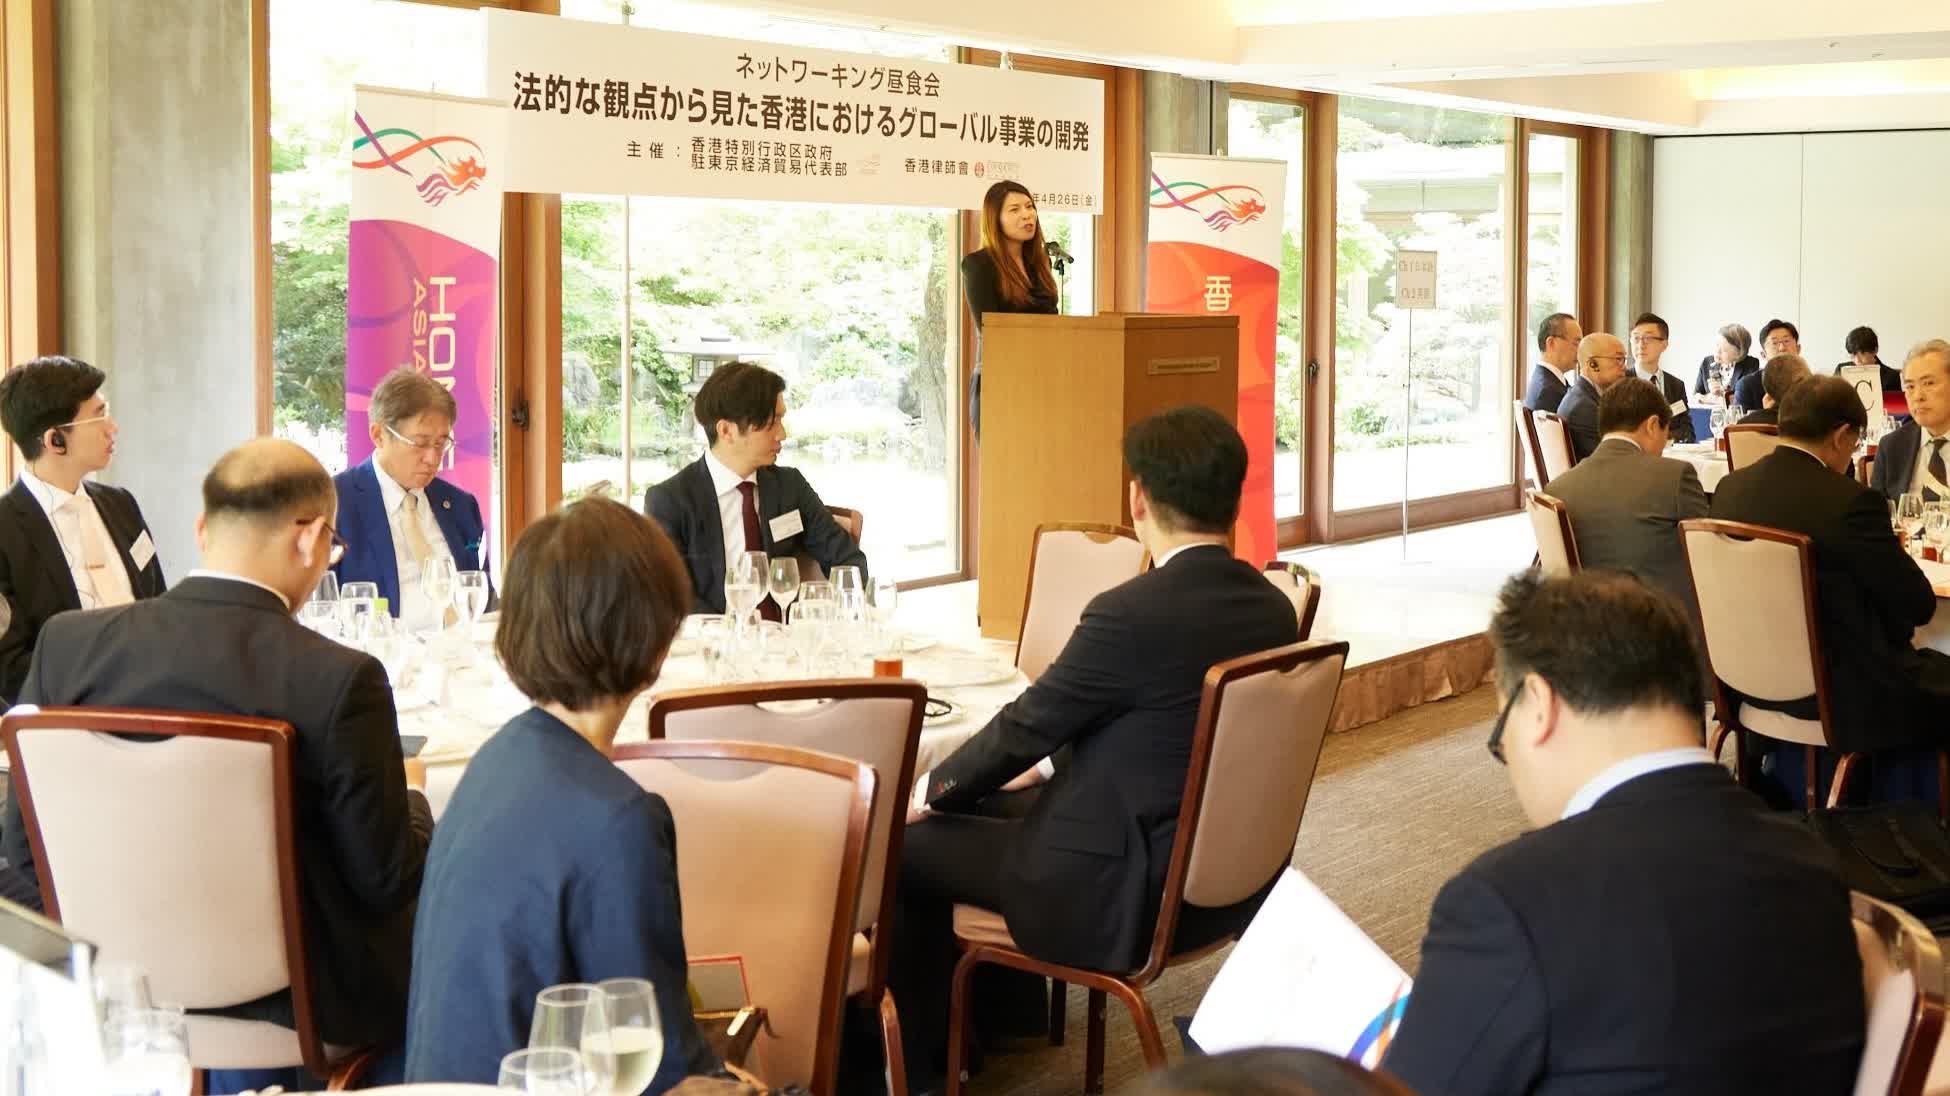 HKETO promotes HK as global business partner for Japanese companies in Tokyo